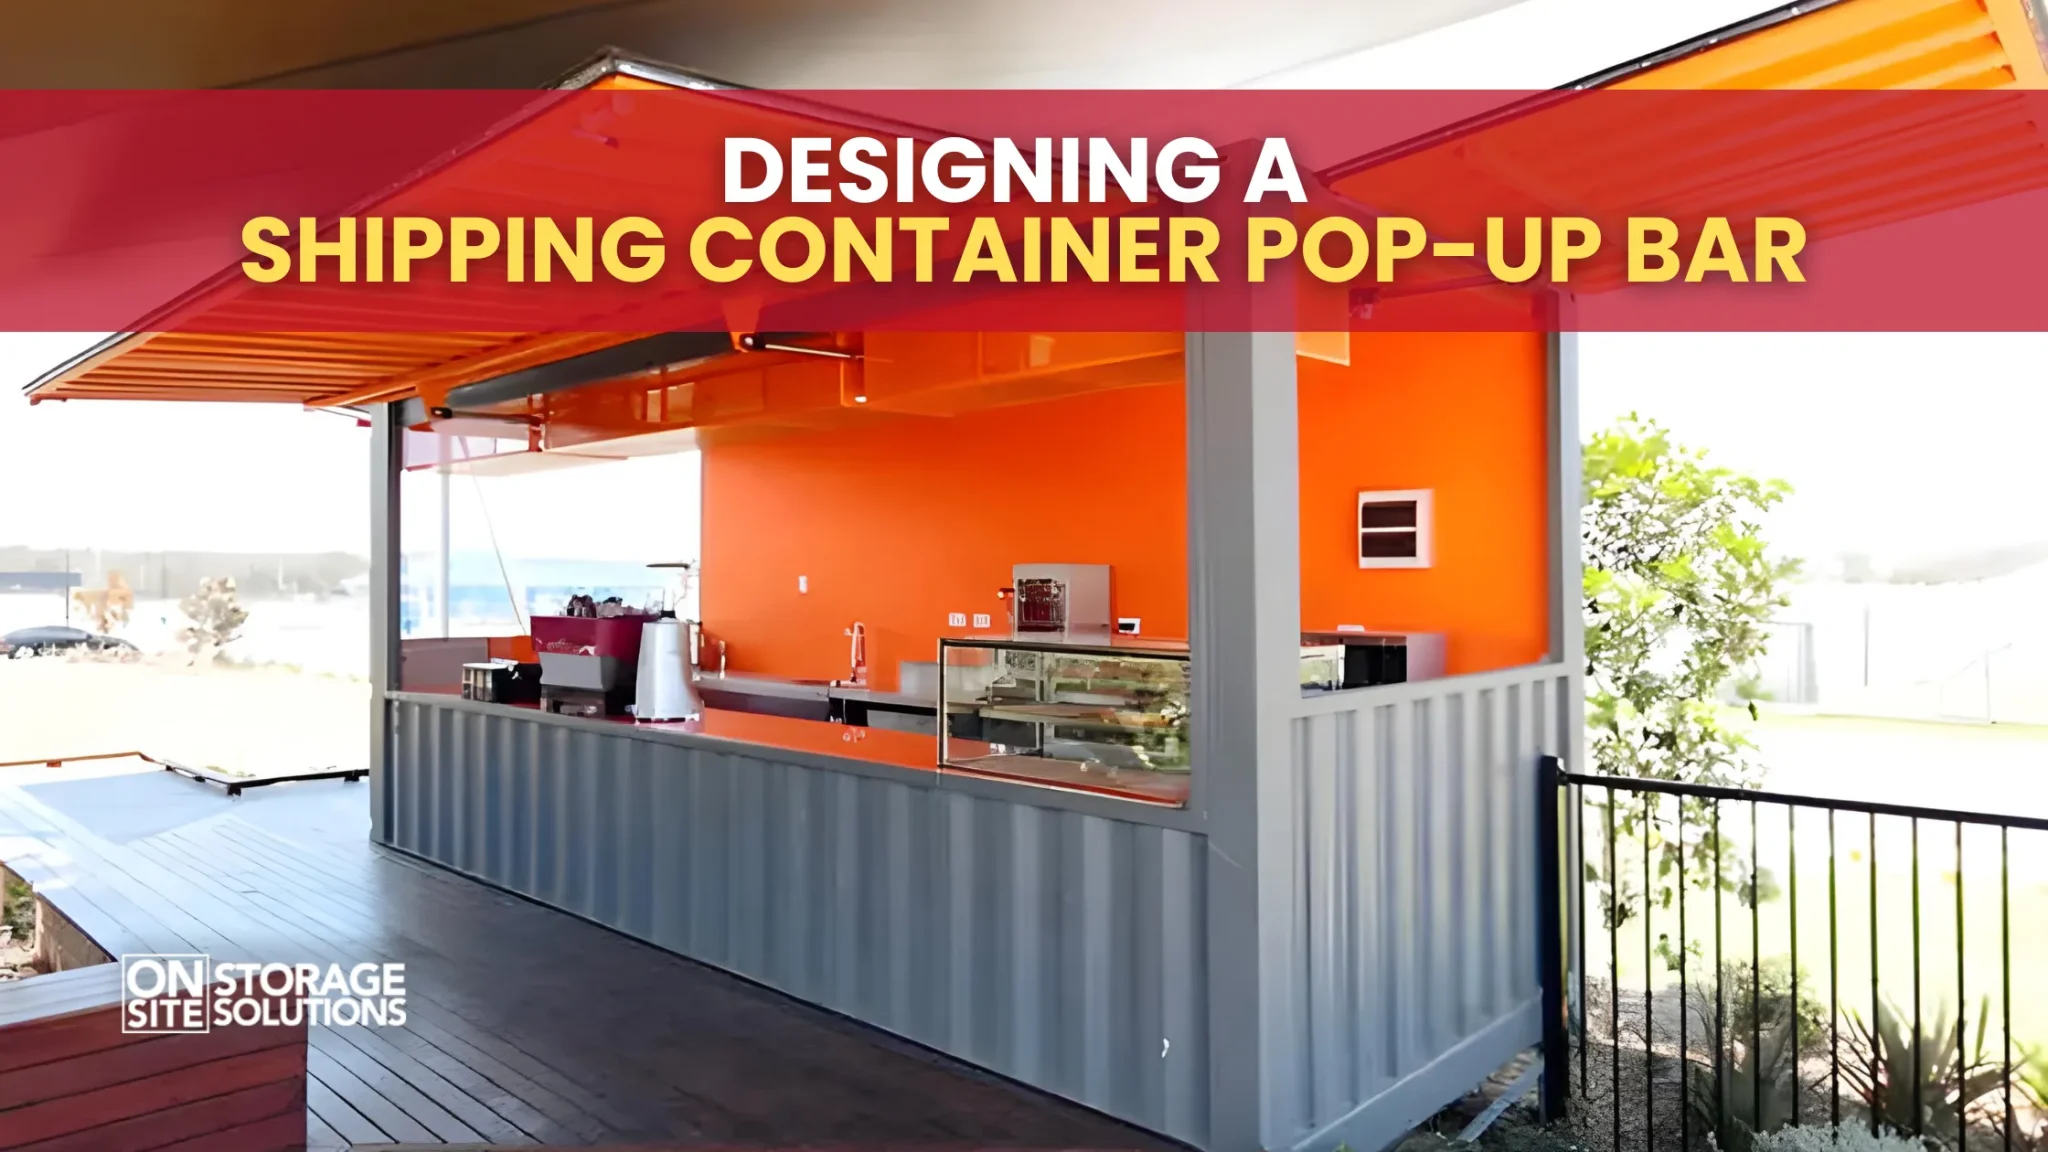 Designing a Shipping Container Pop-Up Bar